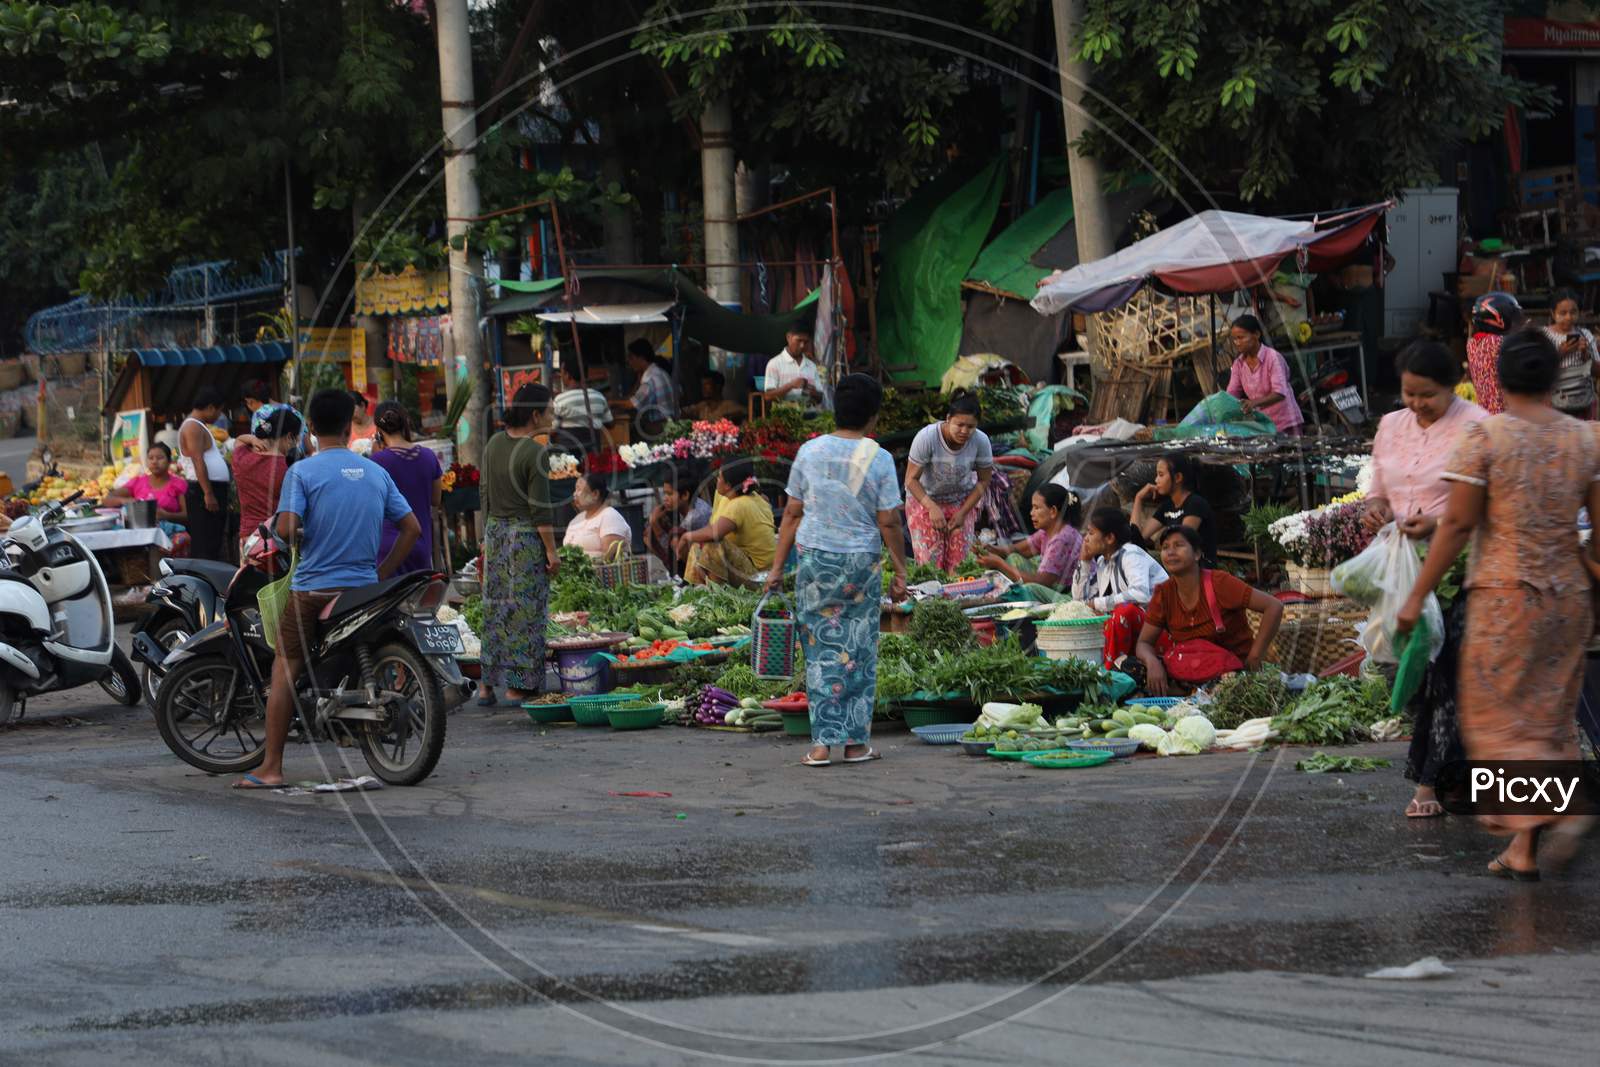 Vegetable and Fruit Market at a Road Side